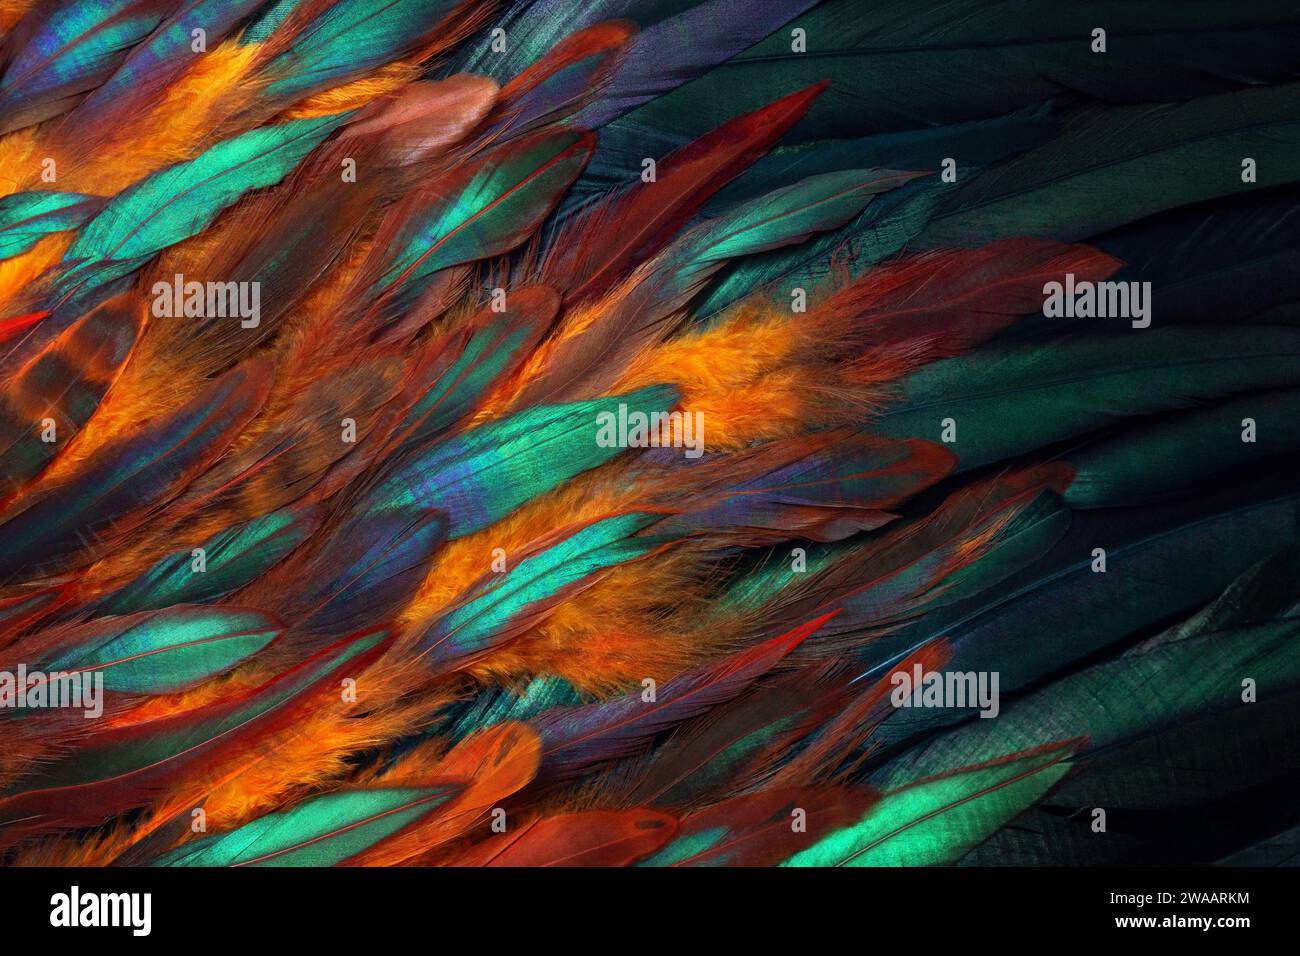 Colorful close up photo of chicken feathers. Shimmer colors of wing. Stock Photo